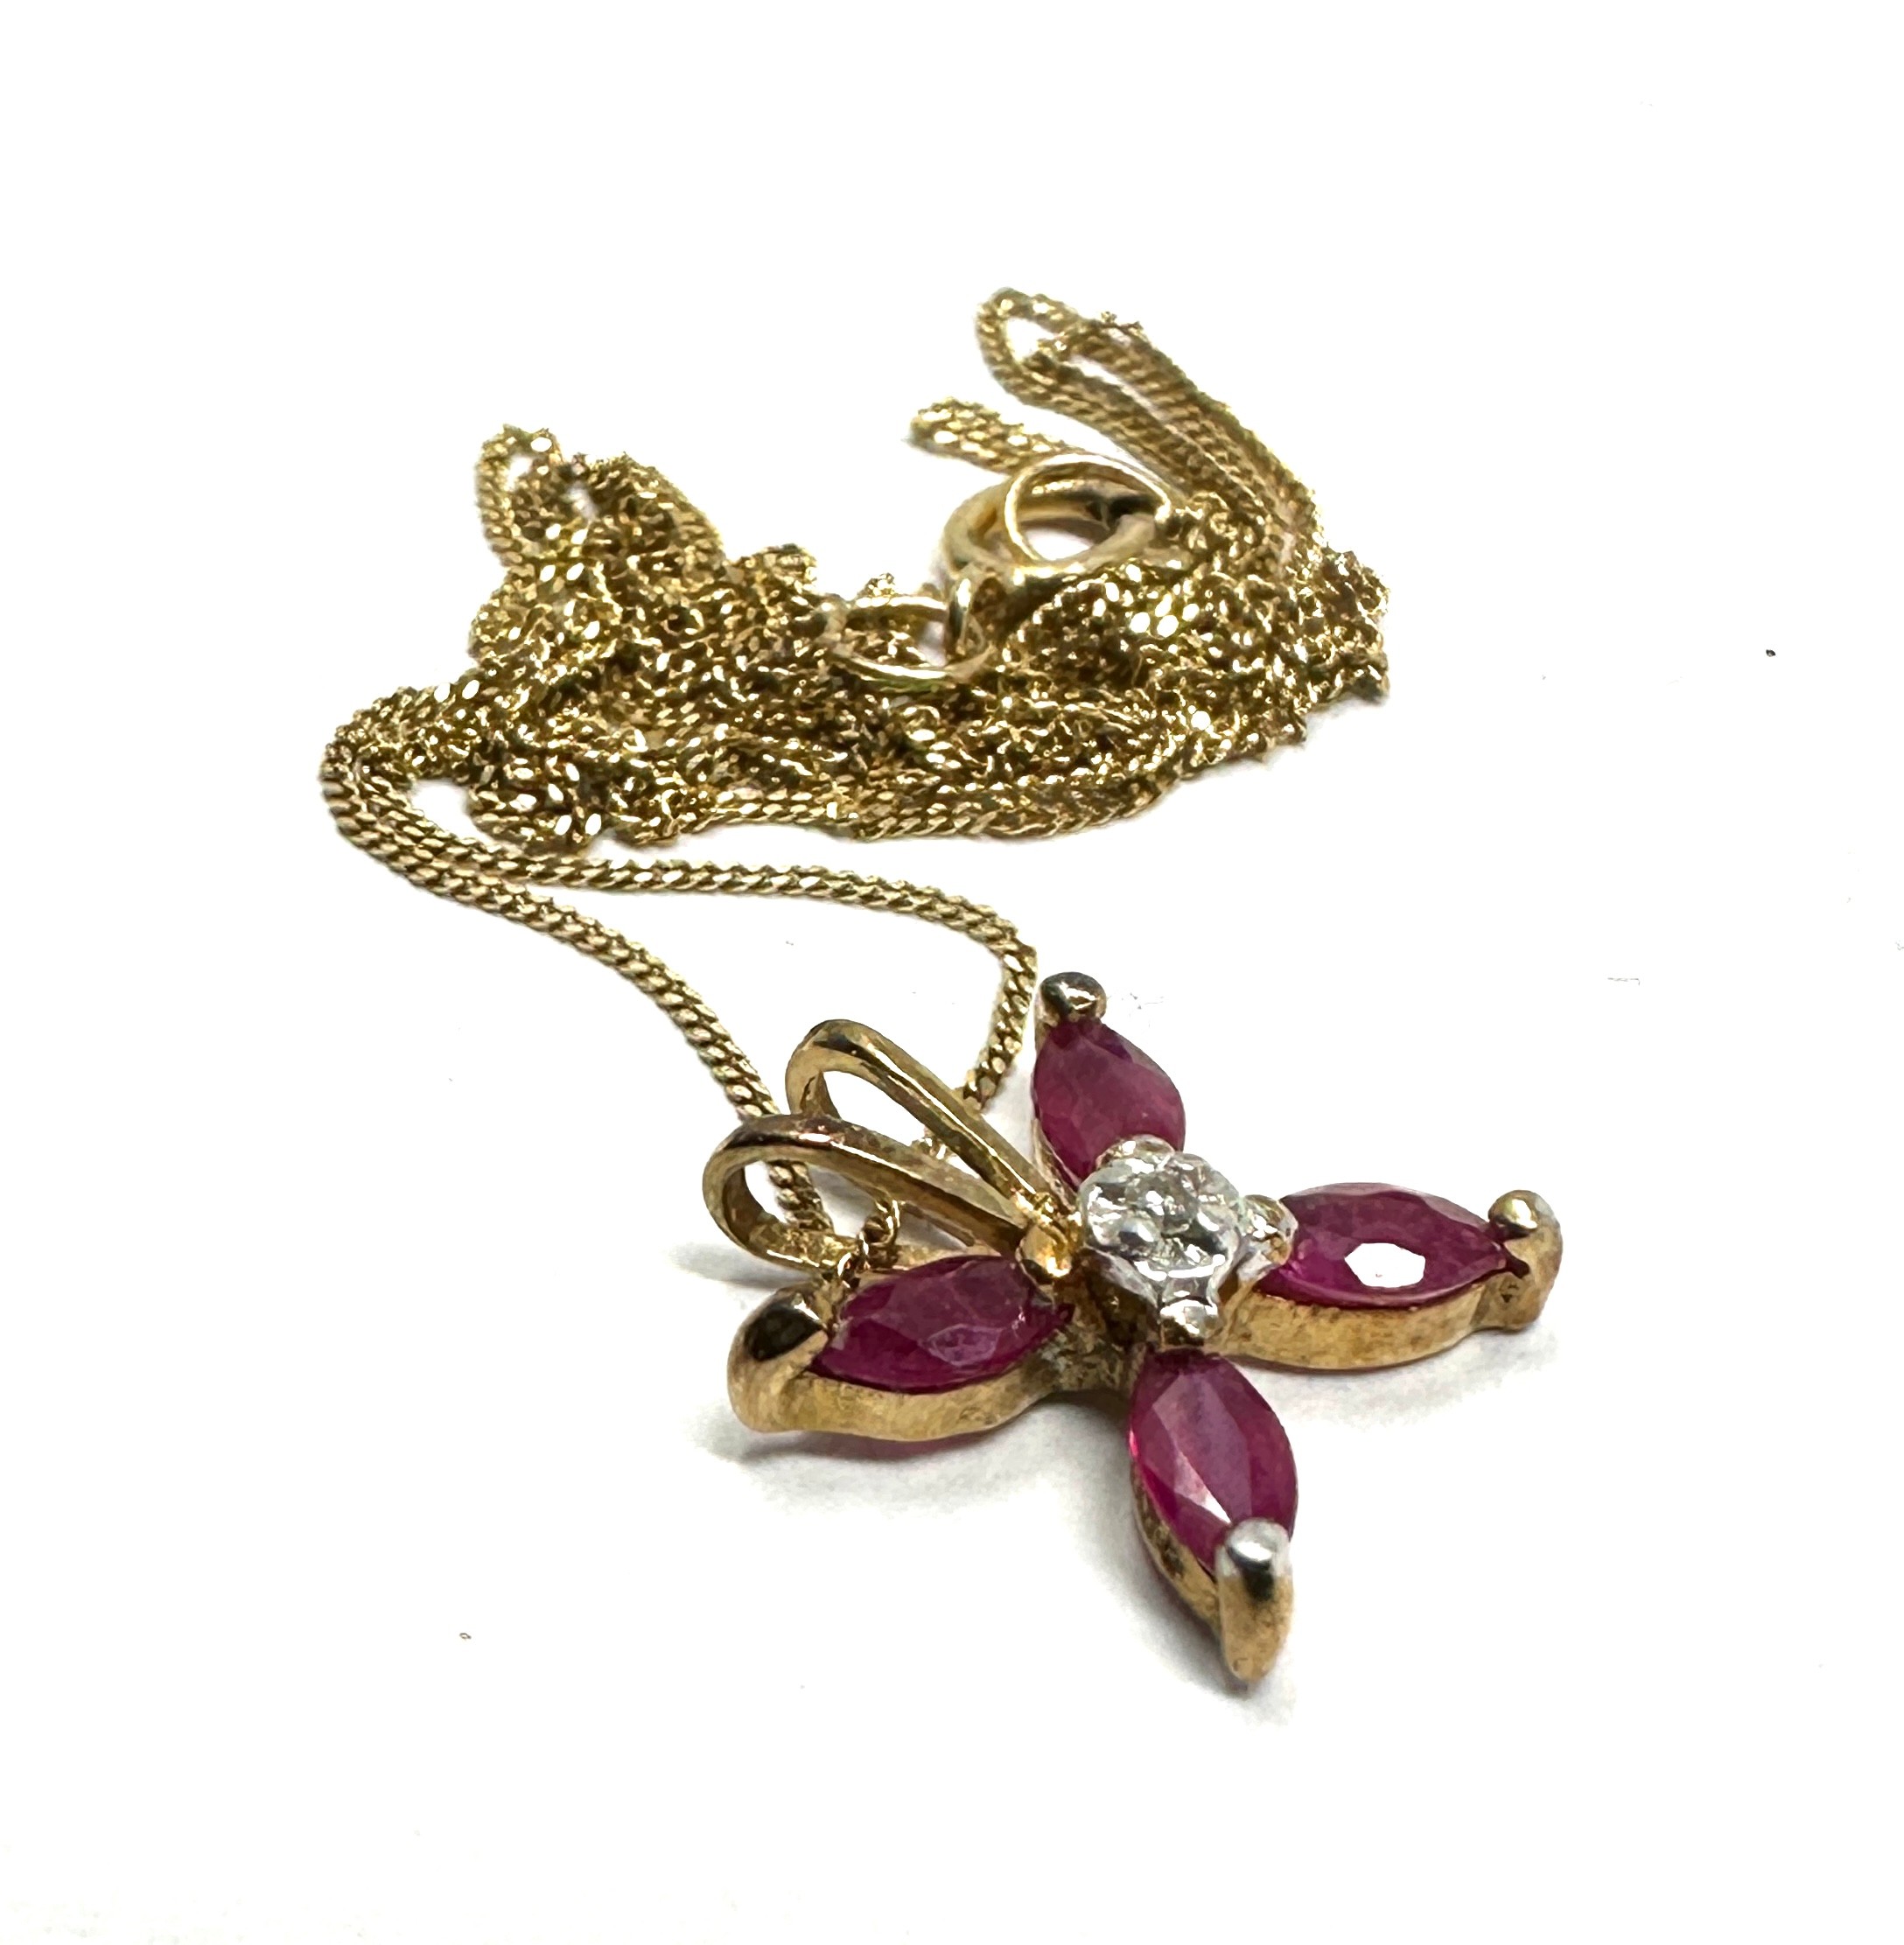 9ct gold diamond & ruby pendant necklace (0.9g) - Image 2 of 2